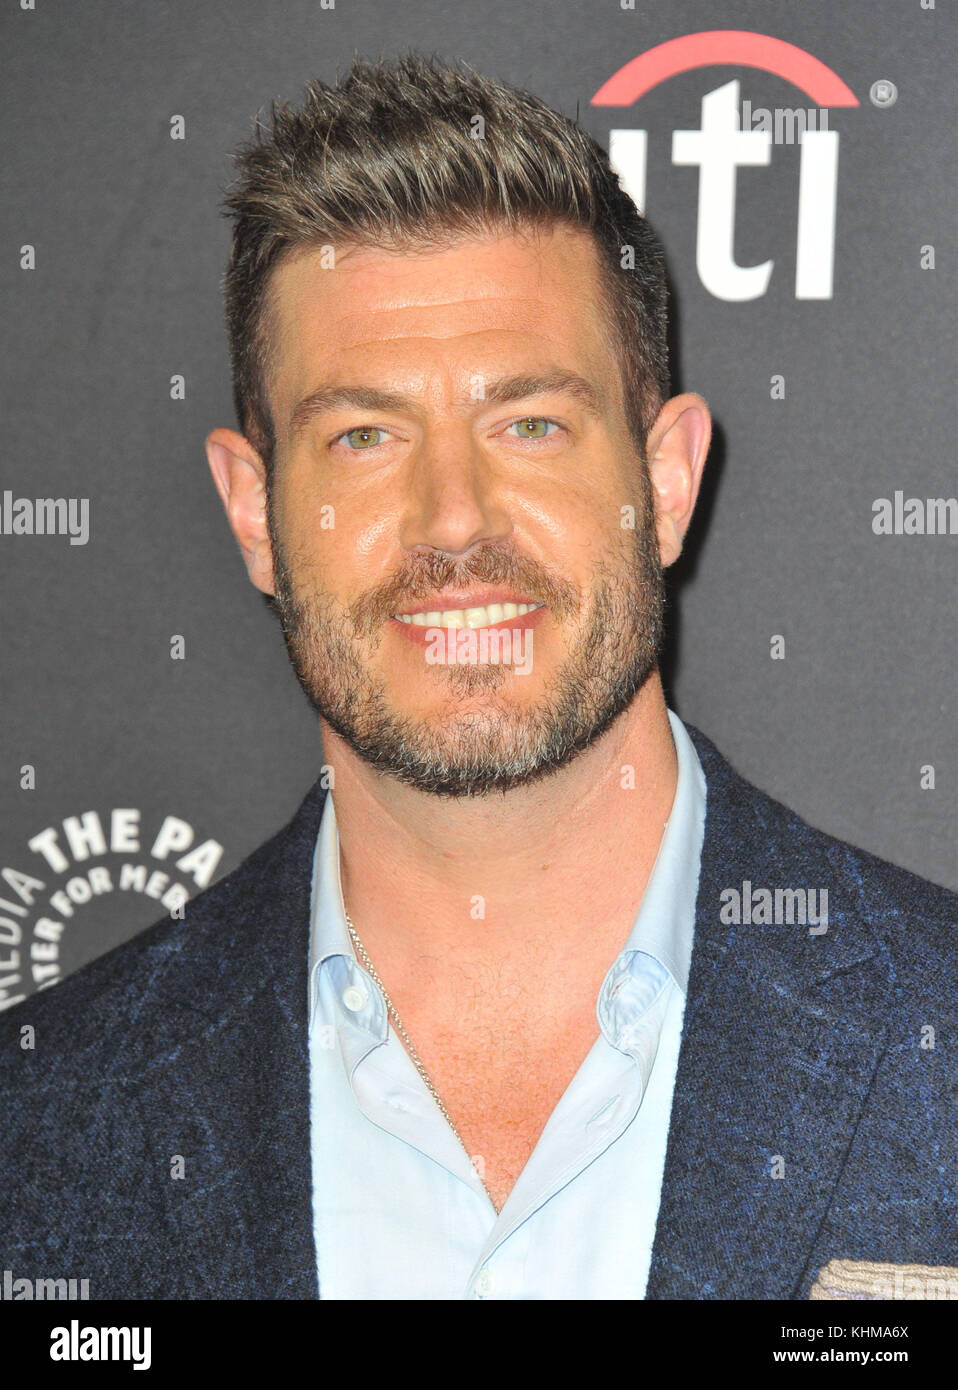 HOLLYWOOD, CA - MARCH 26: Jesse Palmer attends the 'Scandal' event at the Paley Center for Media's 34th annual PaleyFest at Dolby Theatre on March 26, 2017 in Hollywood, California   People:  Jesse Palmer  Transmission Ref:  MNC76 Stock Photo